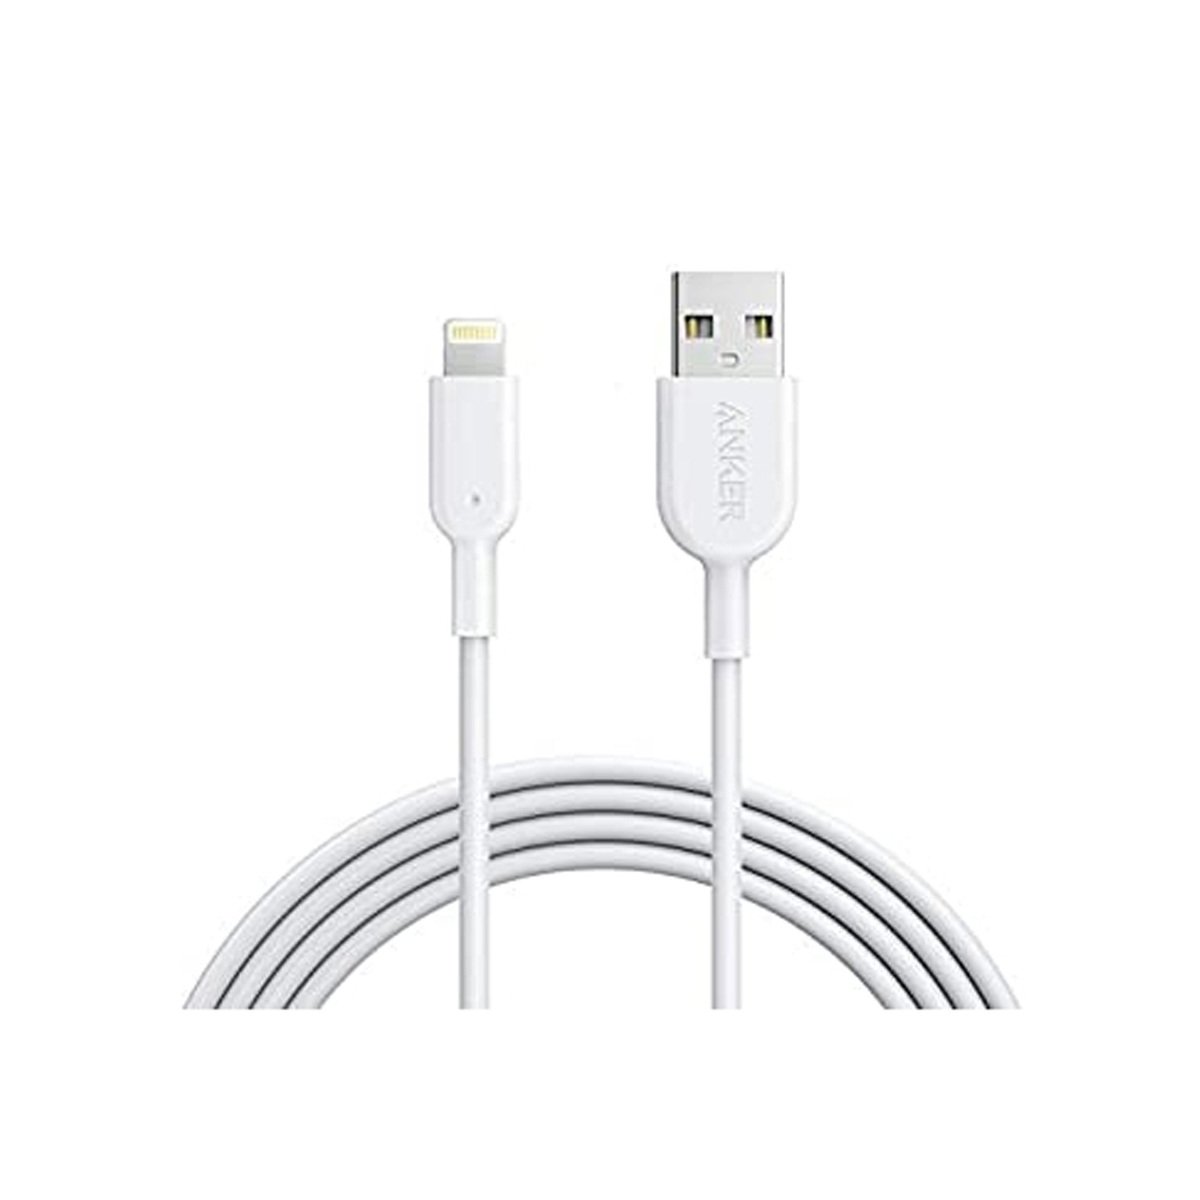 Anker Light USB Cable A8433H21 White